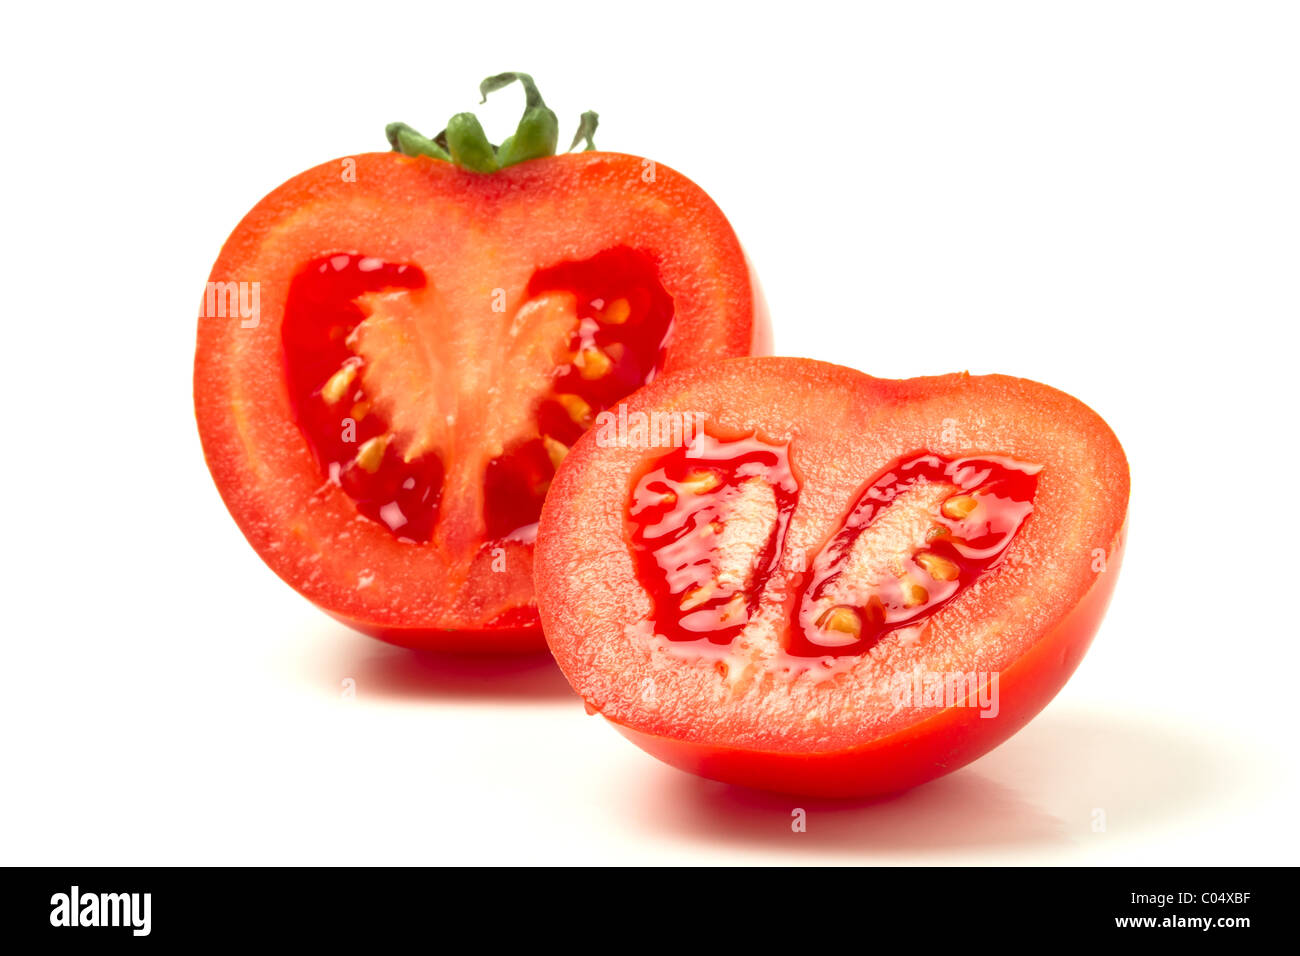 Sliced salad tomato from low perspective isolated on white. Stock Photo